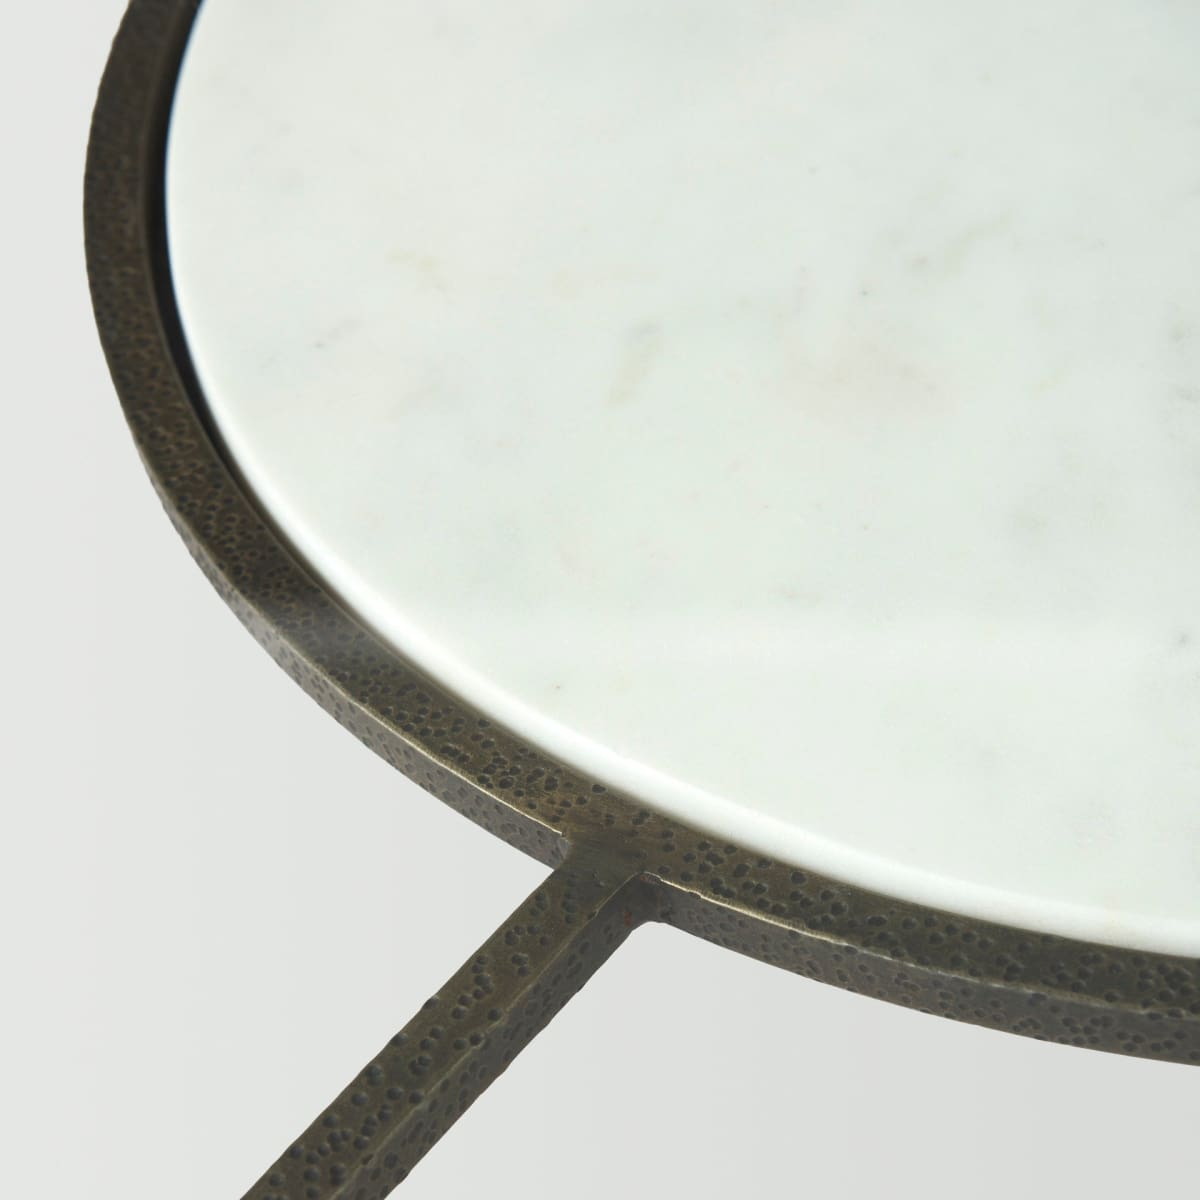 Felicity Coffee Table Glass & Marble | Gold Iron - coffee-tables